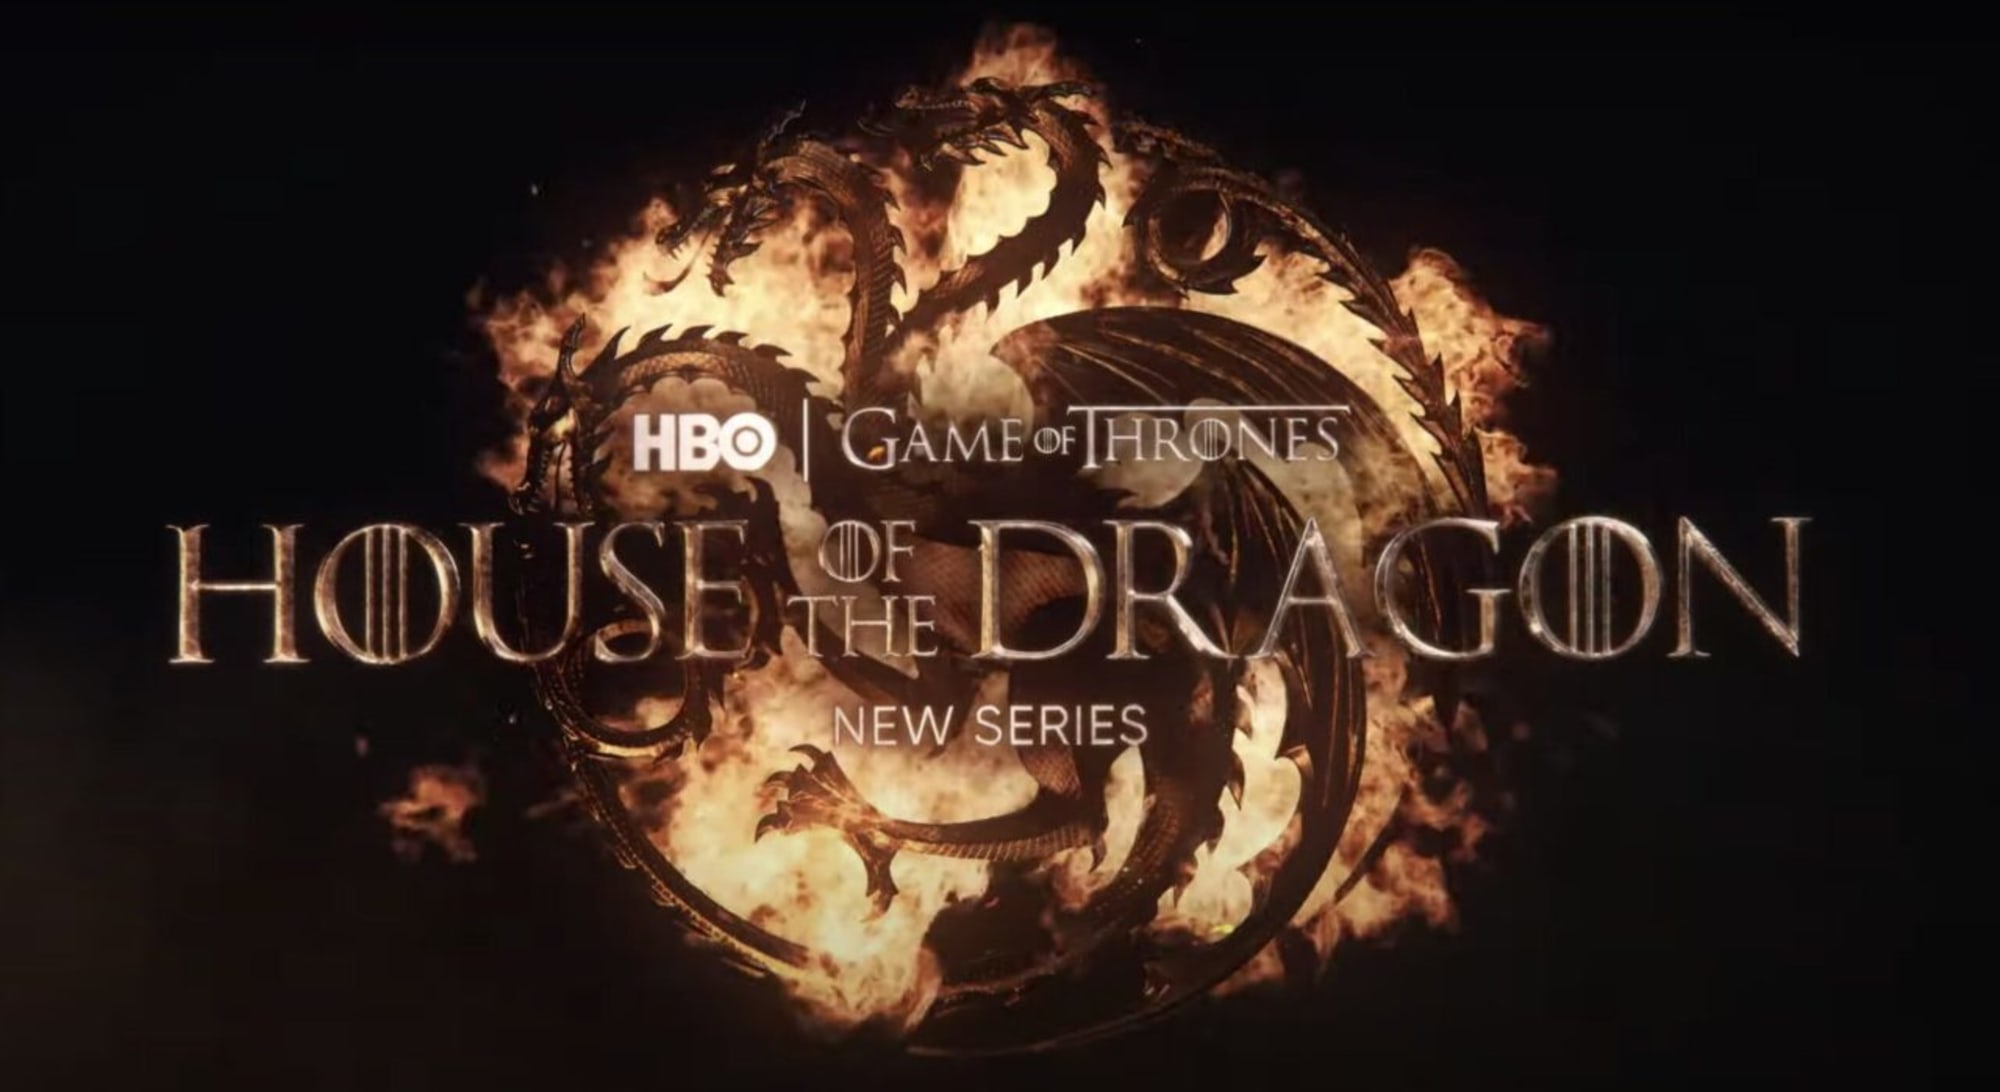 Check out the animated House of the Dragon logo!